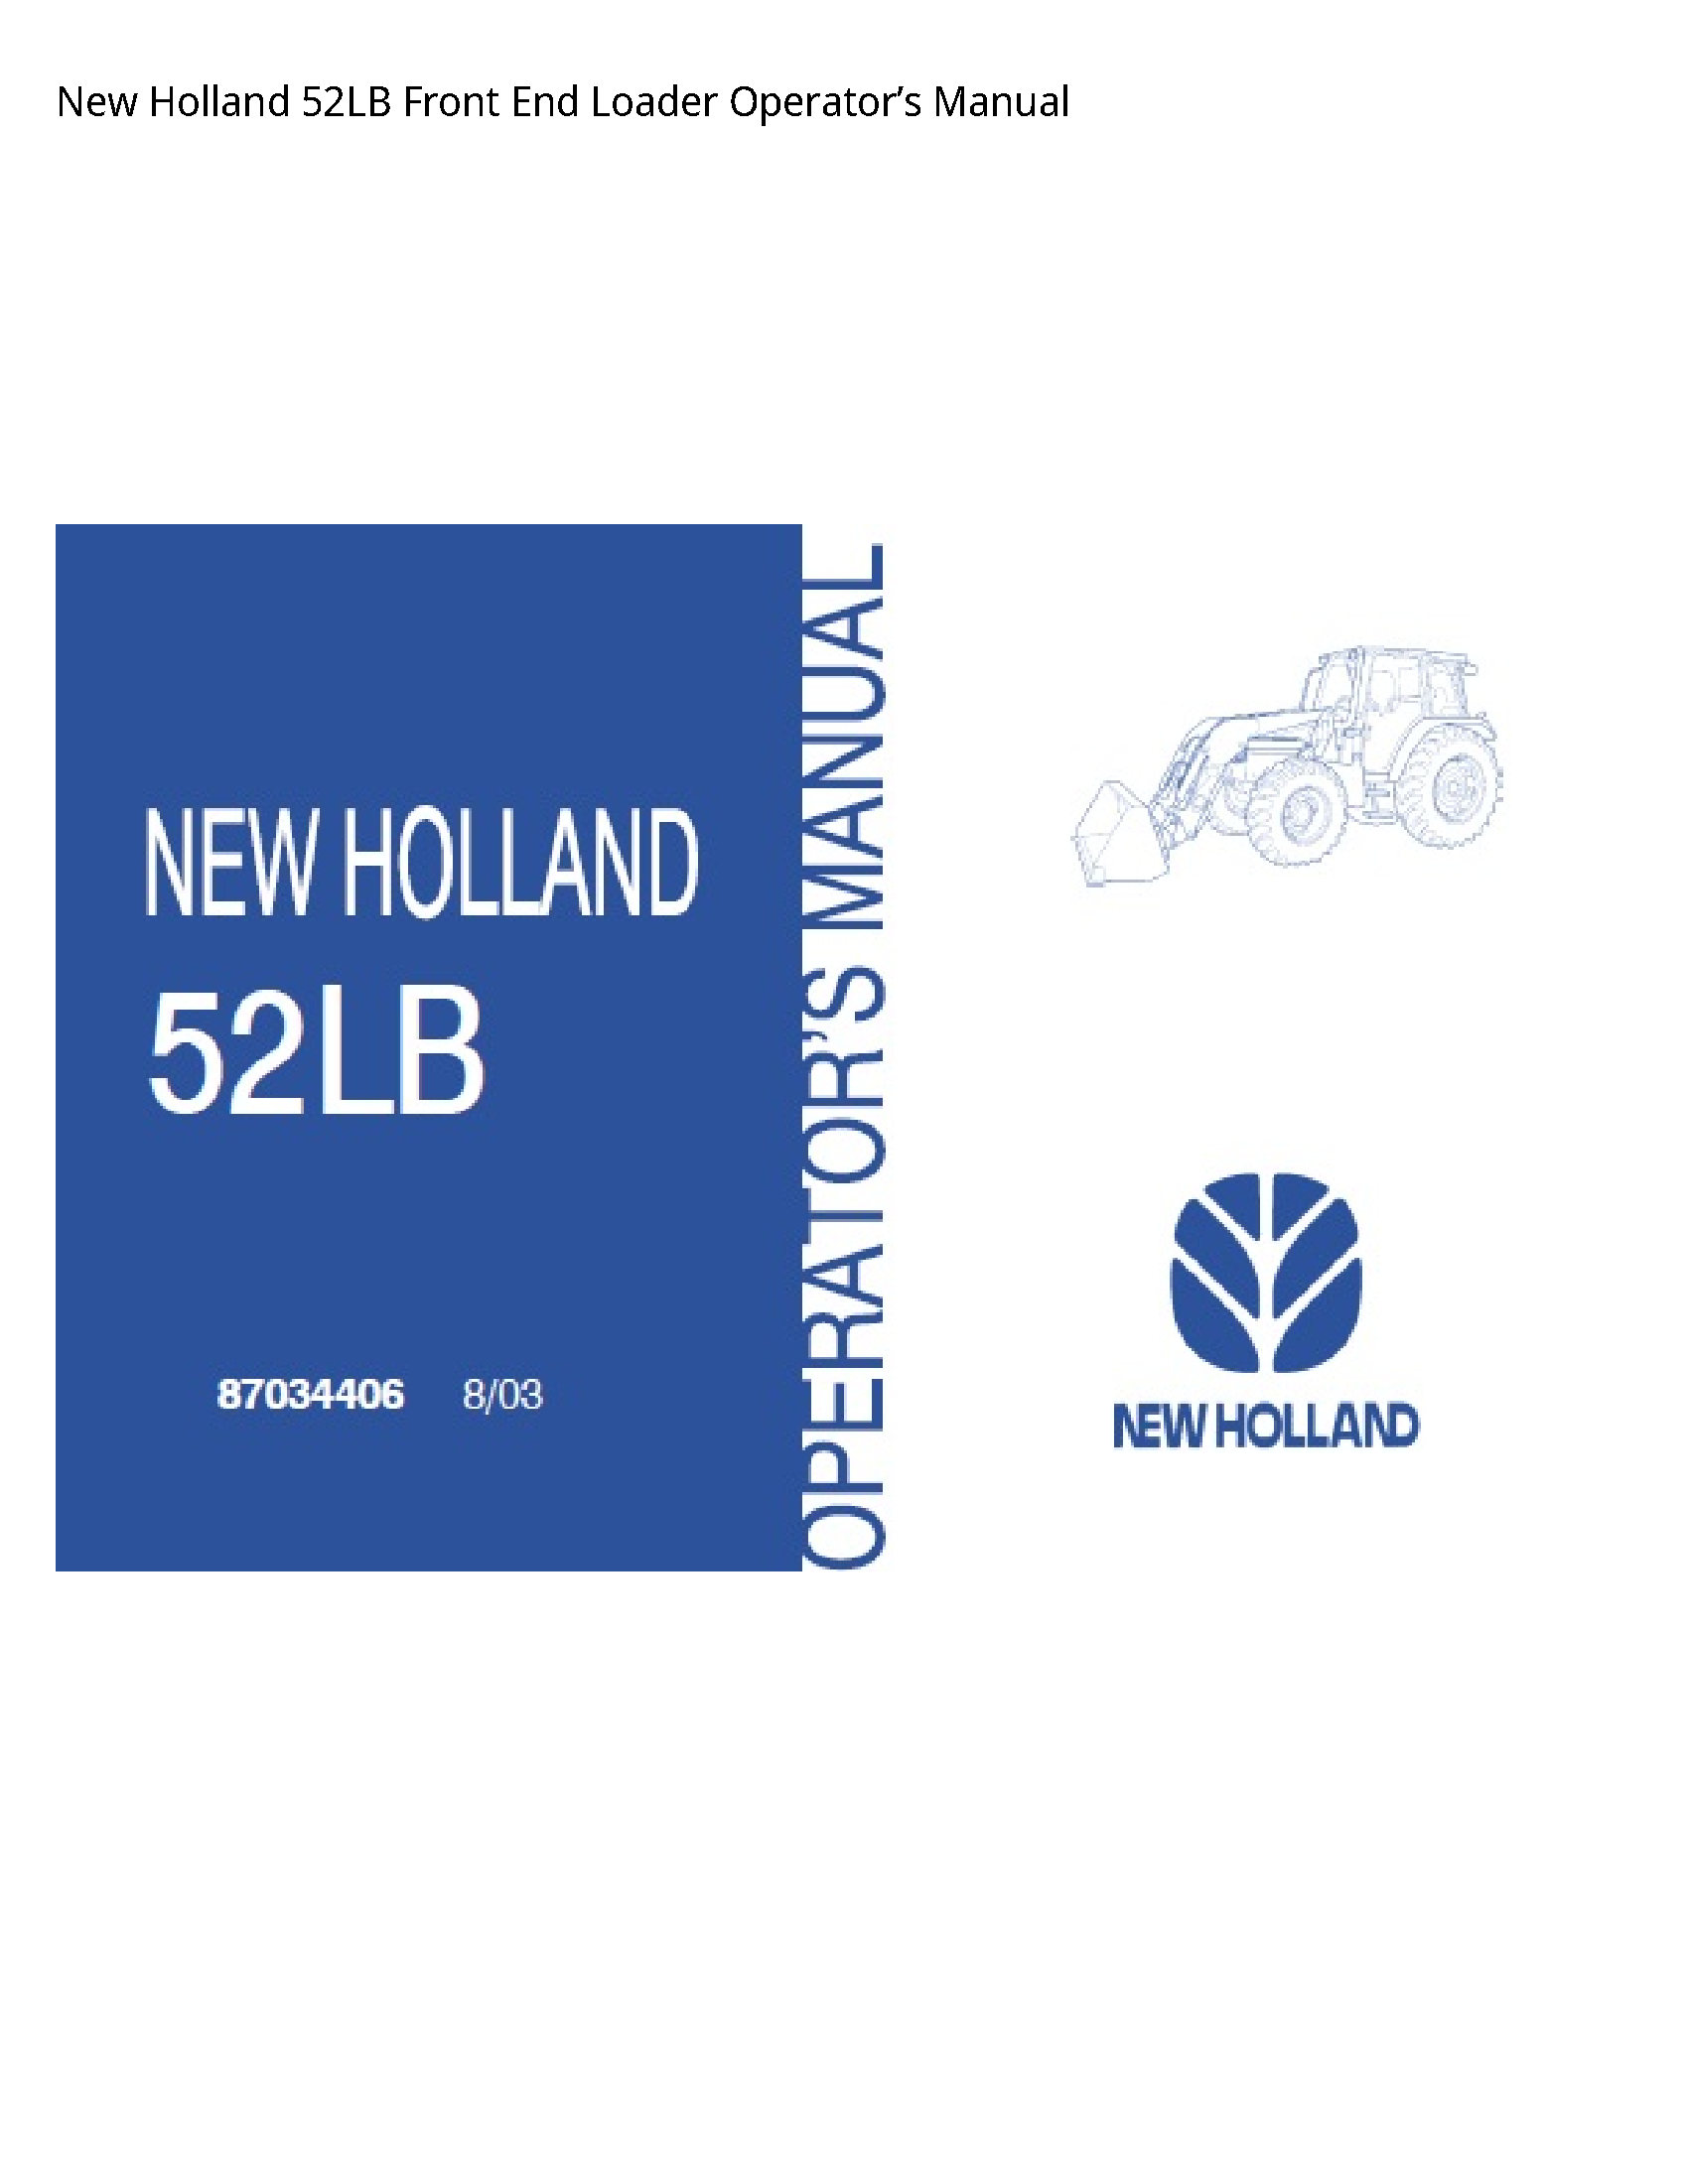 New Holland 52LB Front End Loader Operator’s manual